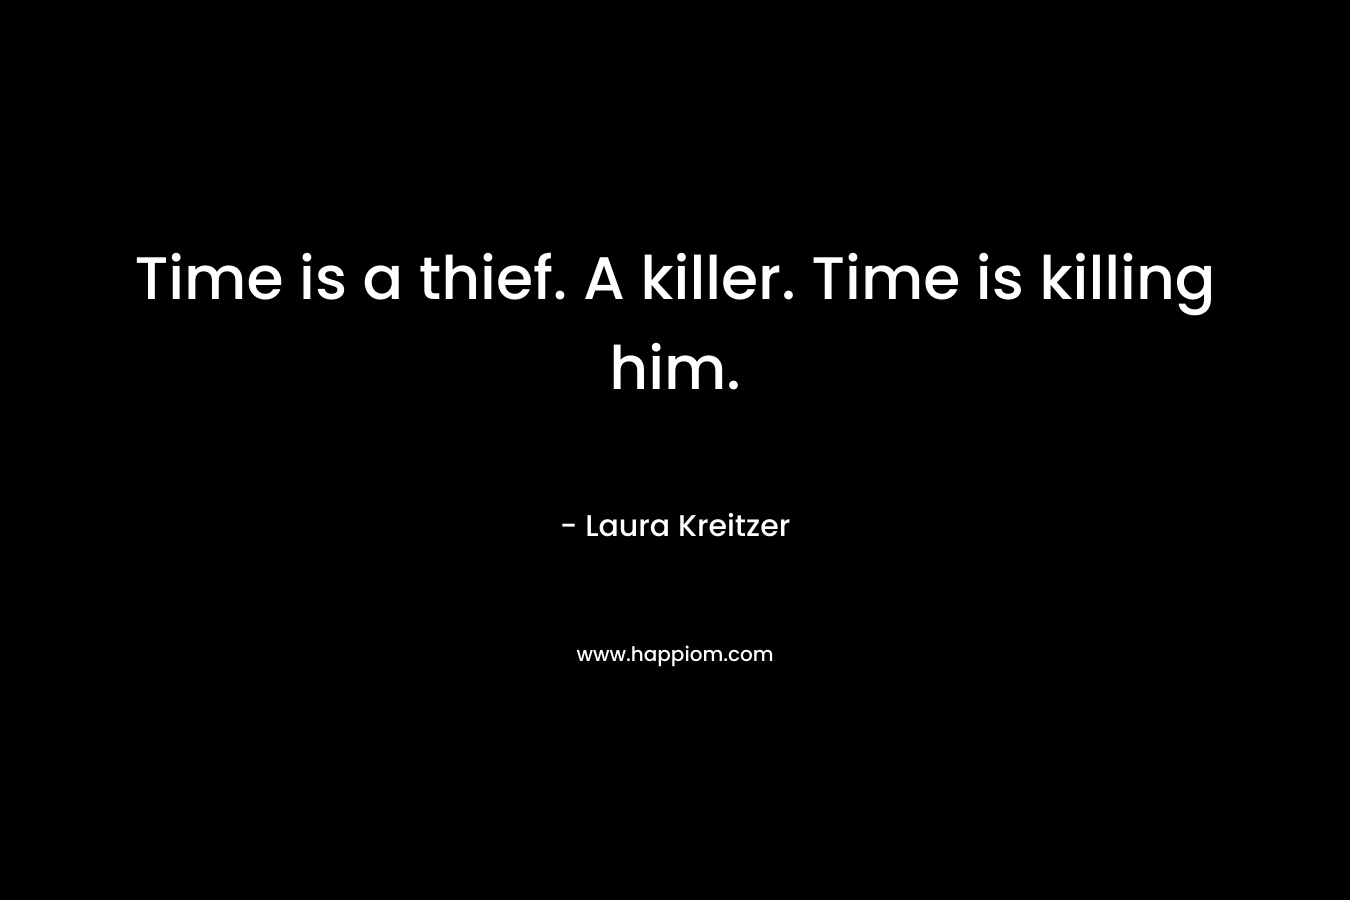 Time is a thief. A killer. Time is killing him. – Laura Kreitzer